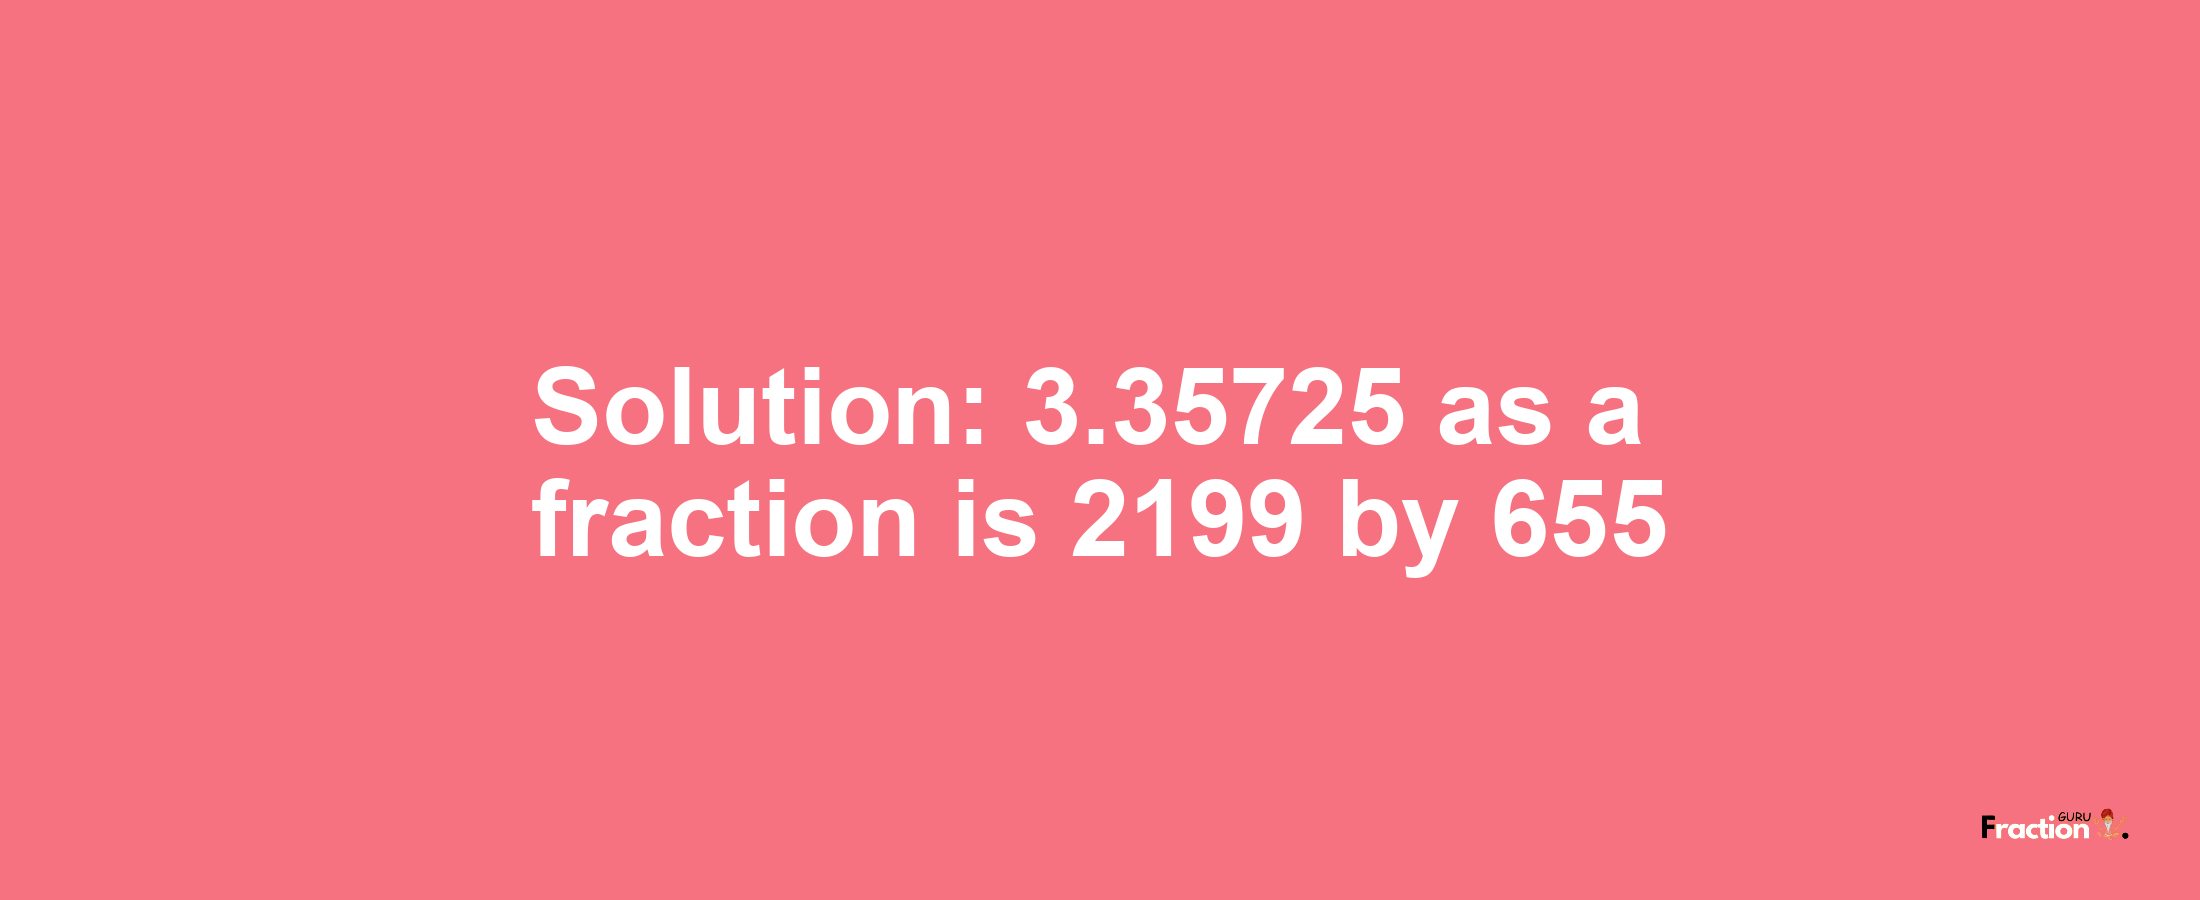 Solution:3.35725 as a fraction is 2199/655